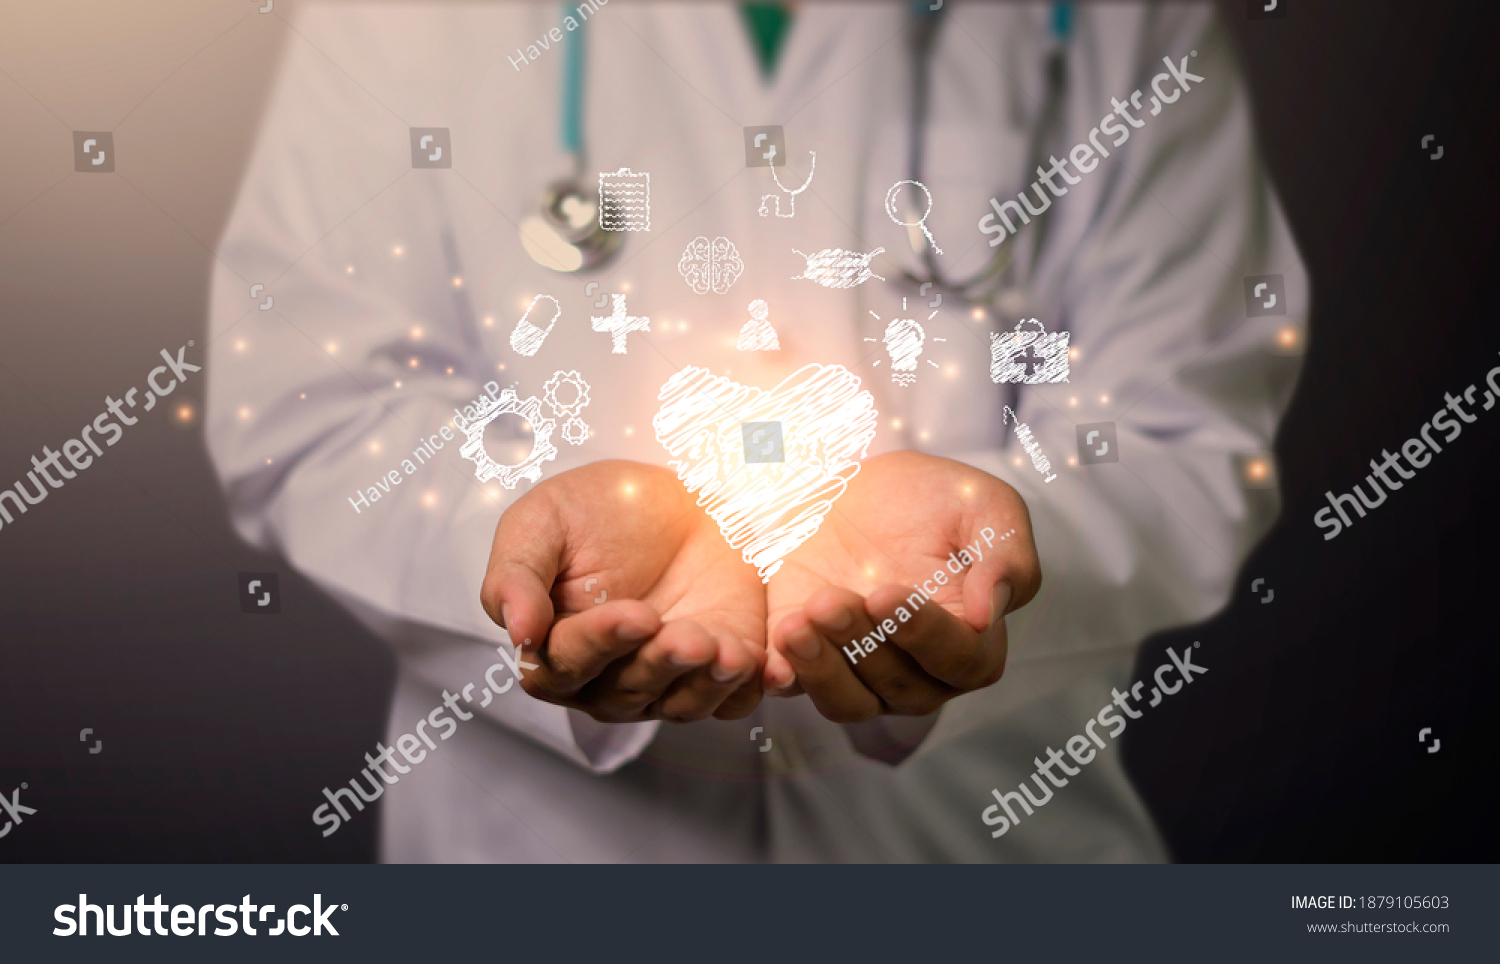 Medical Technology on 2021 target set goals achievement new year resolution, doctor health care worker planning saving world pandemic COVID-19 strategy ideas, icon copy space orange vintage background #1879105603